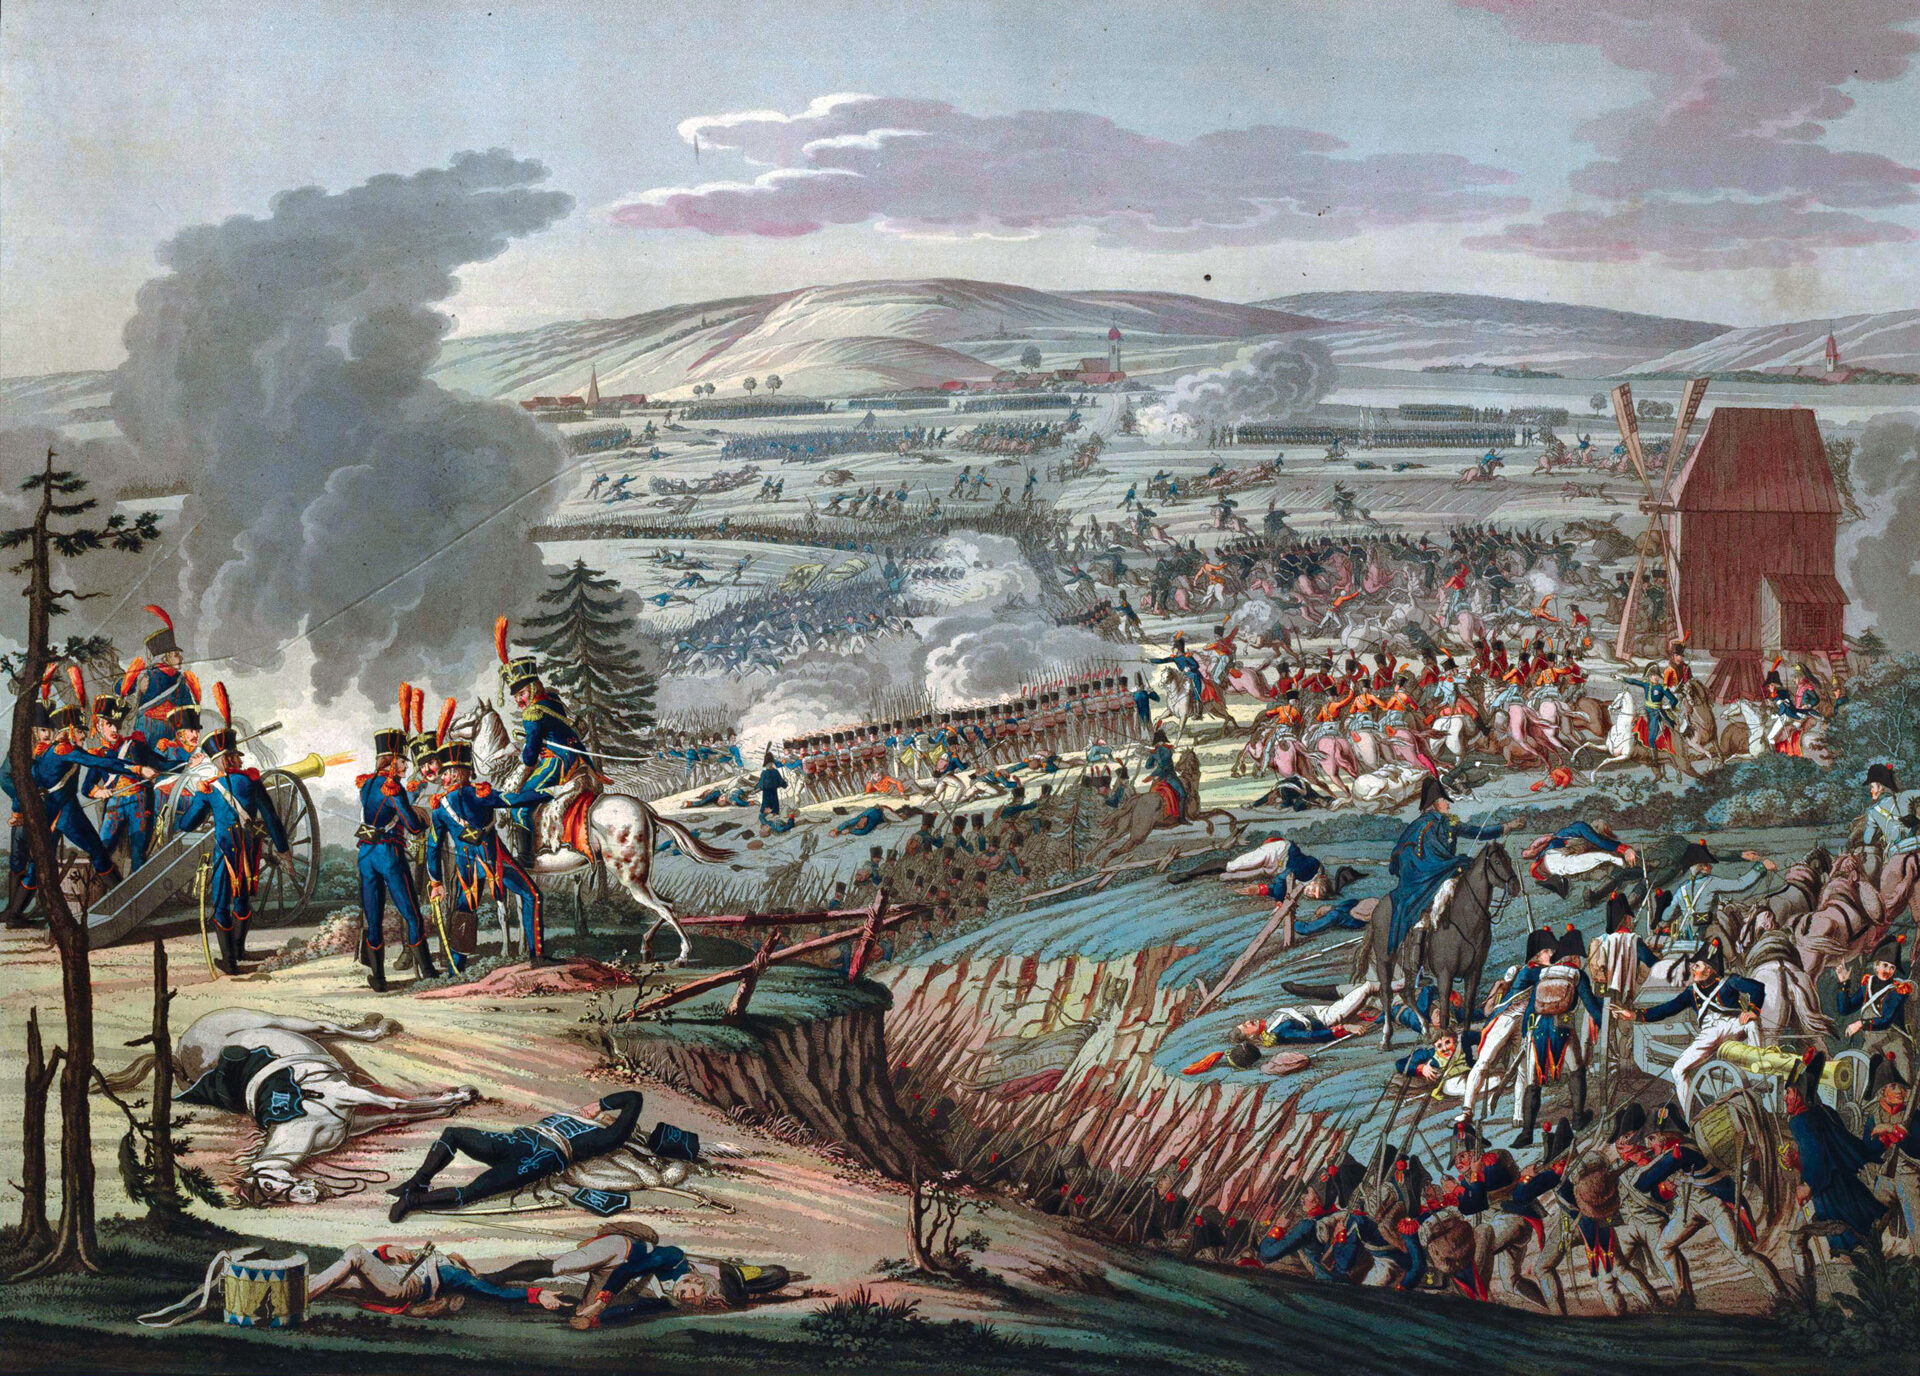 Napoleon’s troops are shown attacking the Prussians at Jena. Napoleon’s artillery crushed the Prussian flanks, and subsequent French cavalry attacks caused panic among already shaken troops, compelling Prince Hohenlohe to order a general retreat. 